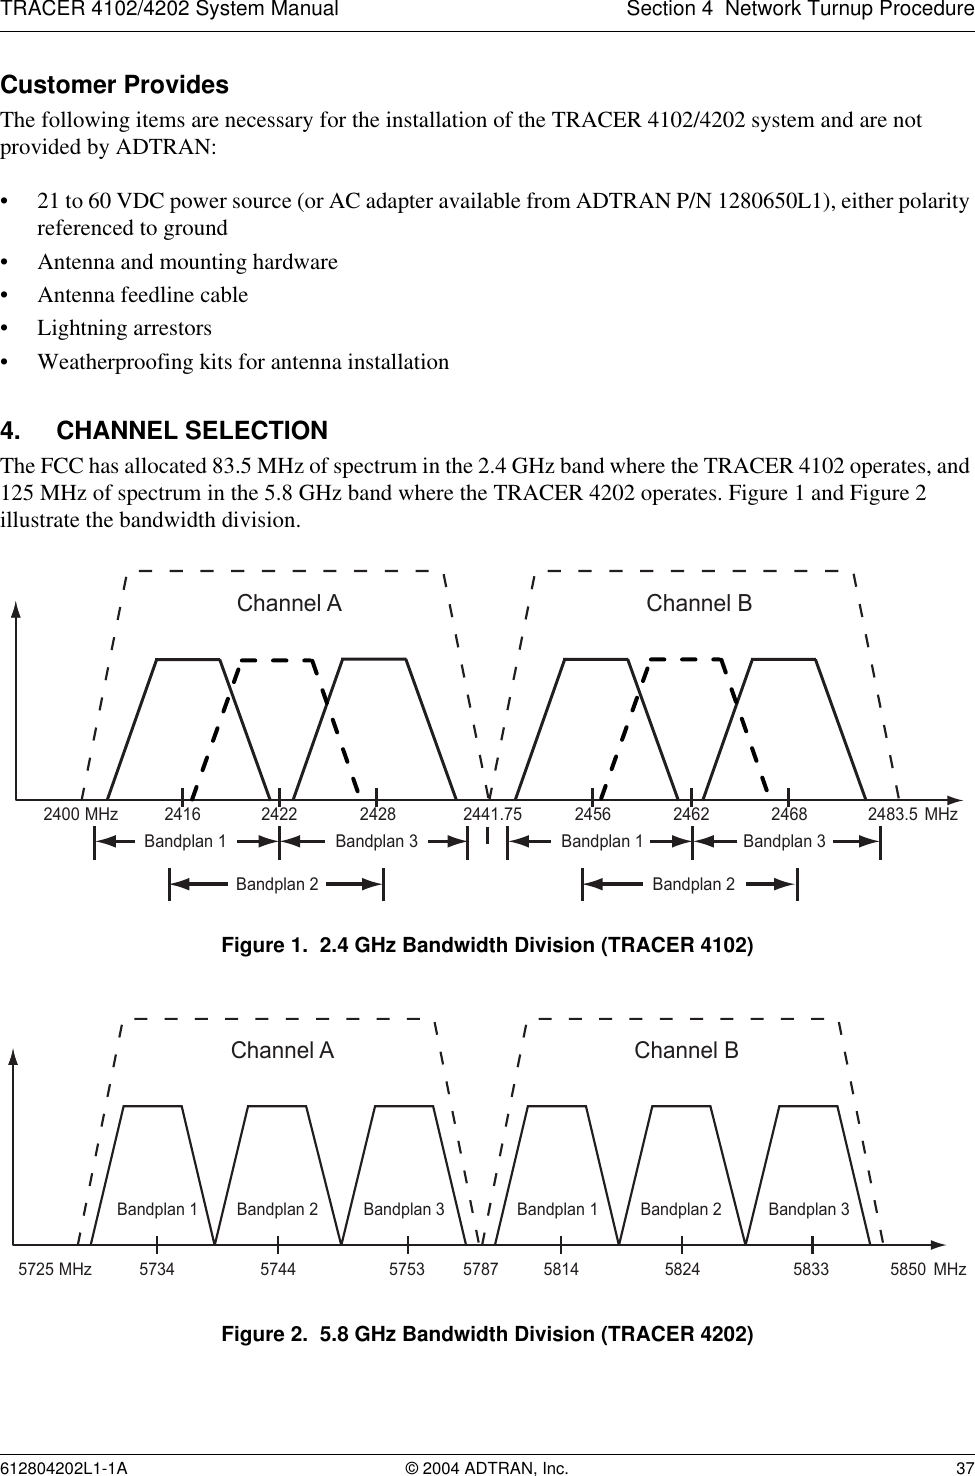 TRACER 4102/4202 System Manual Section 4  Network Turnup Procedure612804202L1-1A © 2004 ADTRAN, Inc. 37Customer ProvidesThe following items are necessary for the installation of the TRACER 4102/4202 system and are not provided by ADTRAN:• 21 to 60 VDC power source (or AC adapter available from ADTRAN P/N 1280650L1), either polarity referenced to ground• Antenna and mounting hardware• Antenna feedline cable• Lightning arrestors• Weatherproofing kits for antenna installation4. CHANNEL SELECTIONThe FCC has allocated 83.5 MHz of spectrum in the 2.4 GHz band where the TRACER 4102 operates, and 125 MHz of spectrum in the 5.8 GHz band where the TRACER 4202 operates. Figure 1 and Figure 2 illustrate the bandwidth division. Figure 1.  2.4 GHz Bandwidth Division (TRACER 4102)Figure 2.  5.8 GHz Bandwidth Division (TRACER 4202)Channel!A2416 2441.752422 24282400 MHz 2483.5!MHzBandplan!3Bandplan!2Bandplan!1Channel!B2456 2462 2468Bandplan!3Bandplan!2Bandplan!1Channel!A57345725 5787 58505744 5753MHz MHzBandplan!3Bandplan!2Bandplan!1Channel!B5814 5824 5833Bandplan!3Bandplan!2Bandplan!1